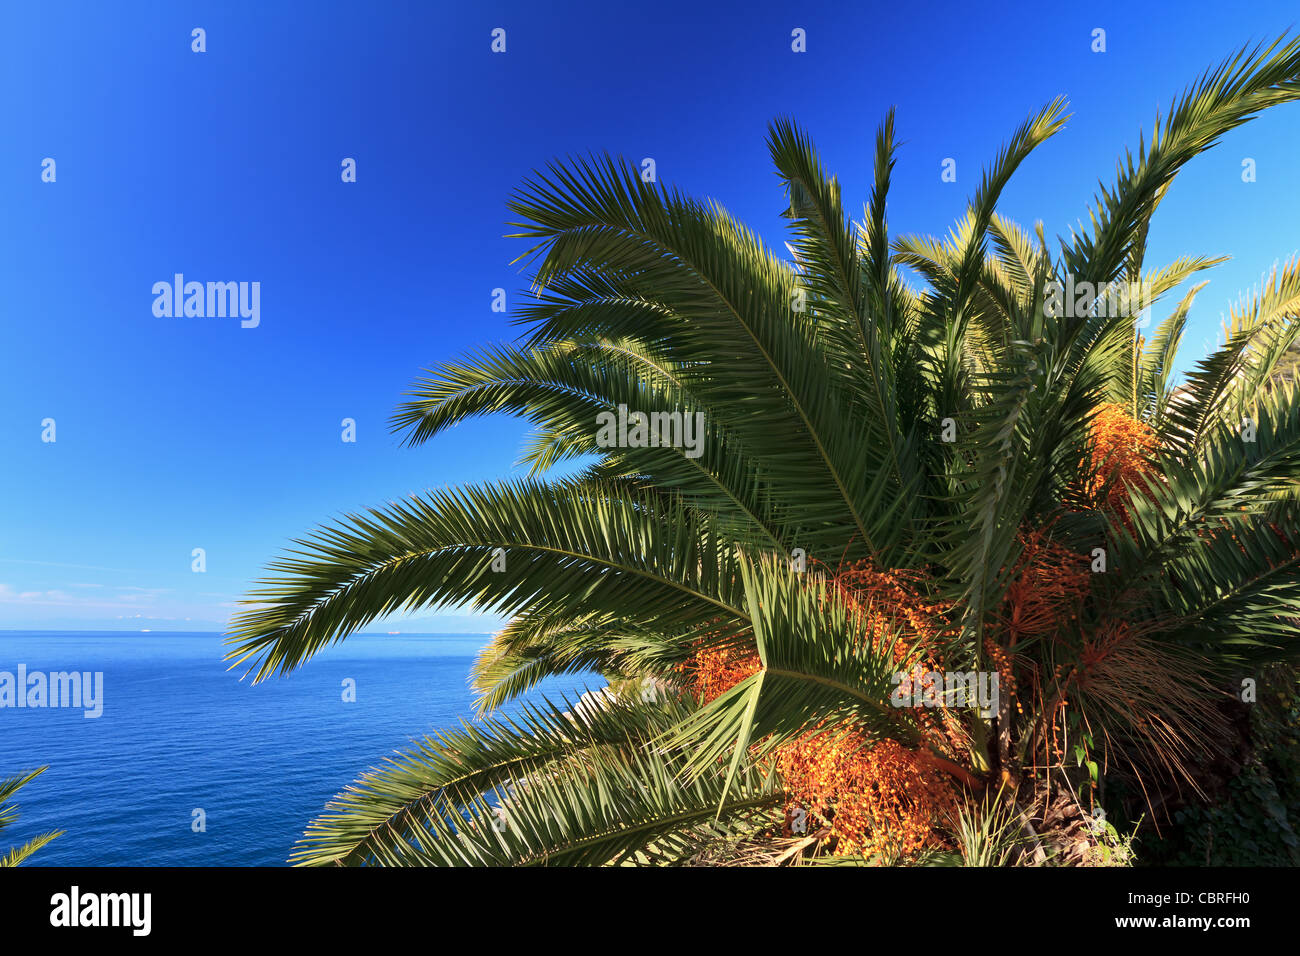 date palm tree with fruits over Mediterranean sea Stock Photo